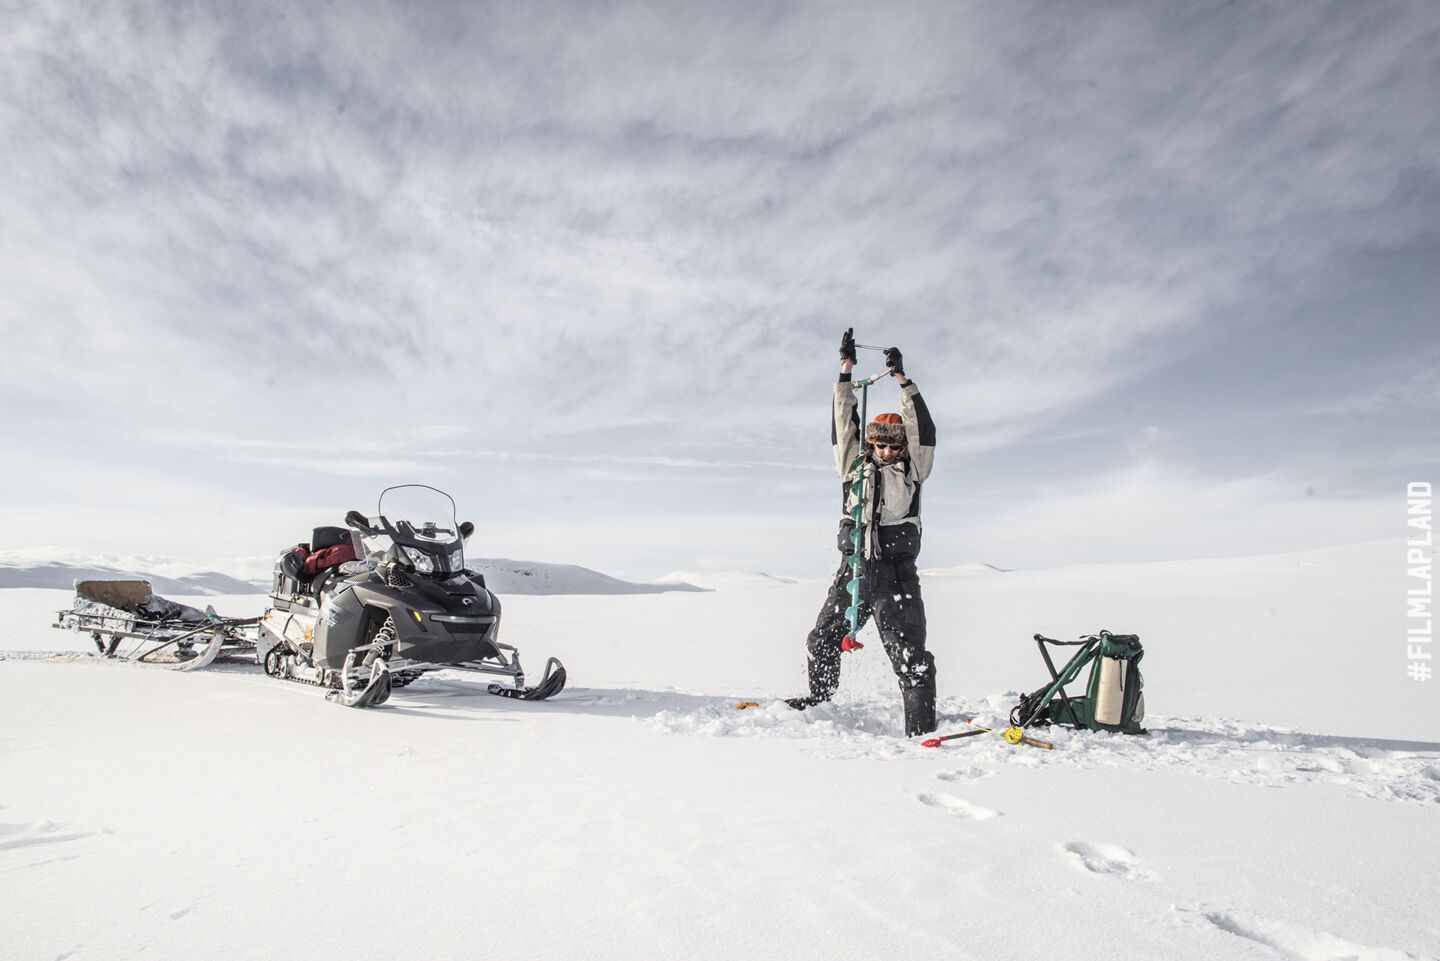 Snowmobile and extreme sports are an important part of northern culture, a feature of filming locations in Finnish Lapland